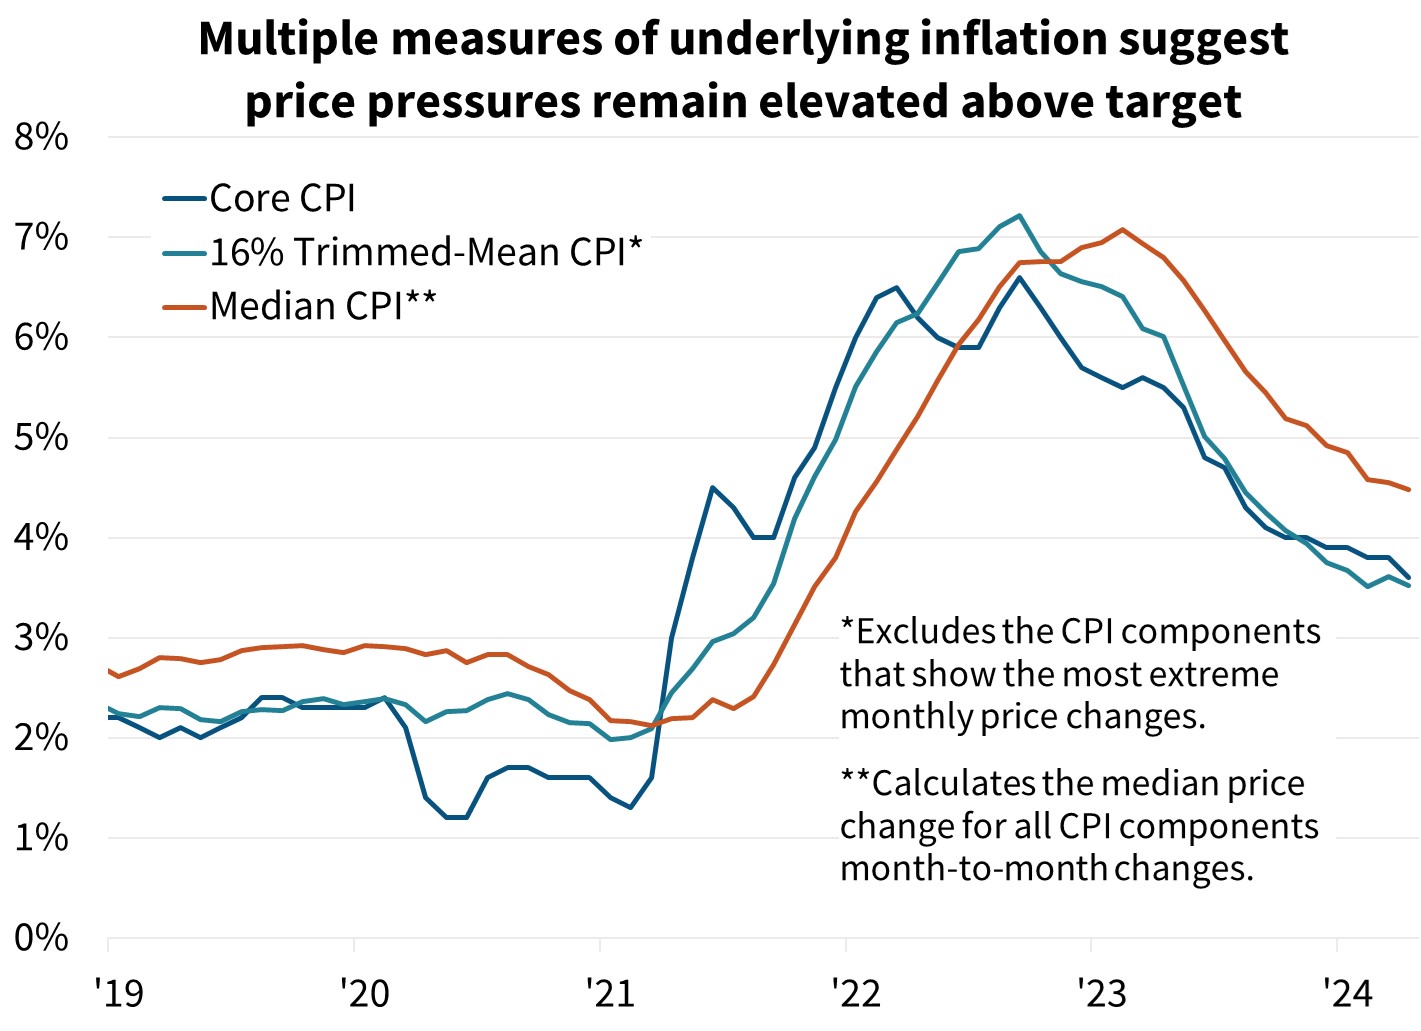 Multiple measures of underlying inflation suggest price pressures remain elevated above target